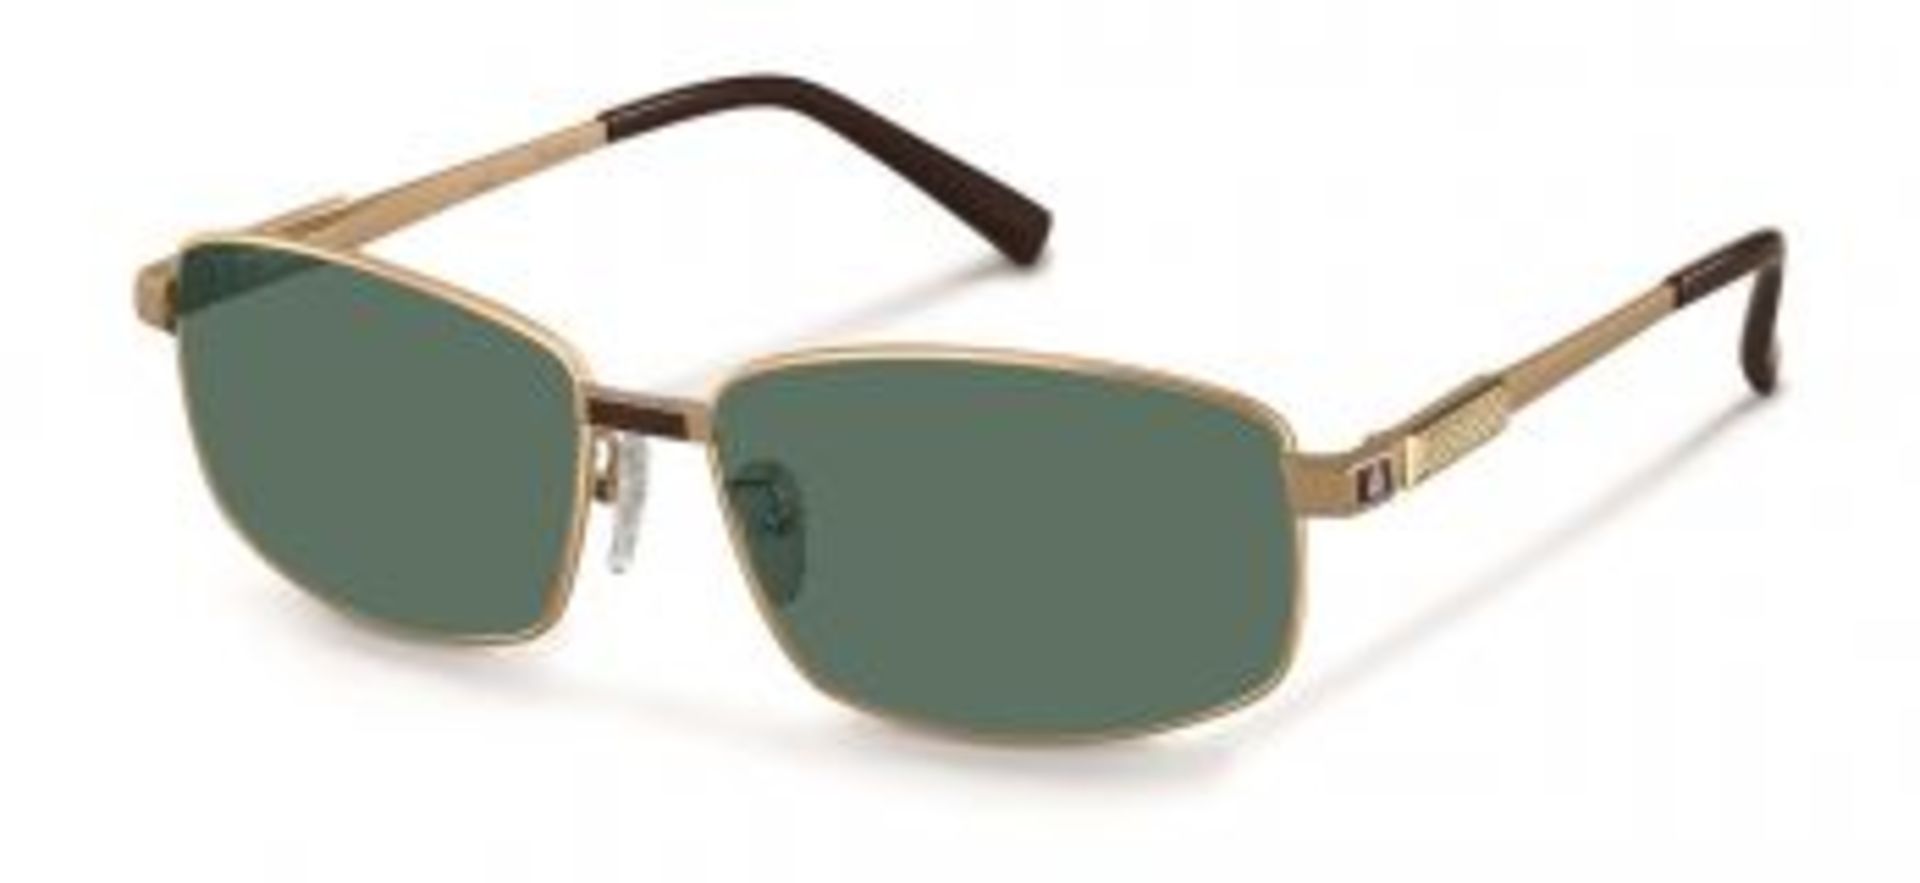 Brand New Pair Of Mens Dunhill Sunglasses - Gold Titanium Frame With Green Lens RRP: £245.00 D5001-